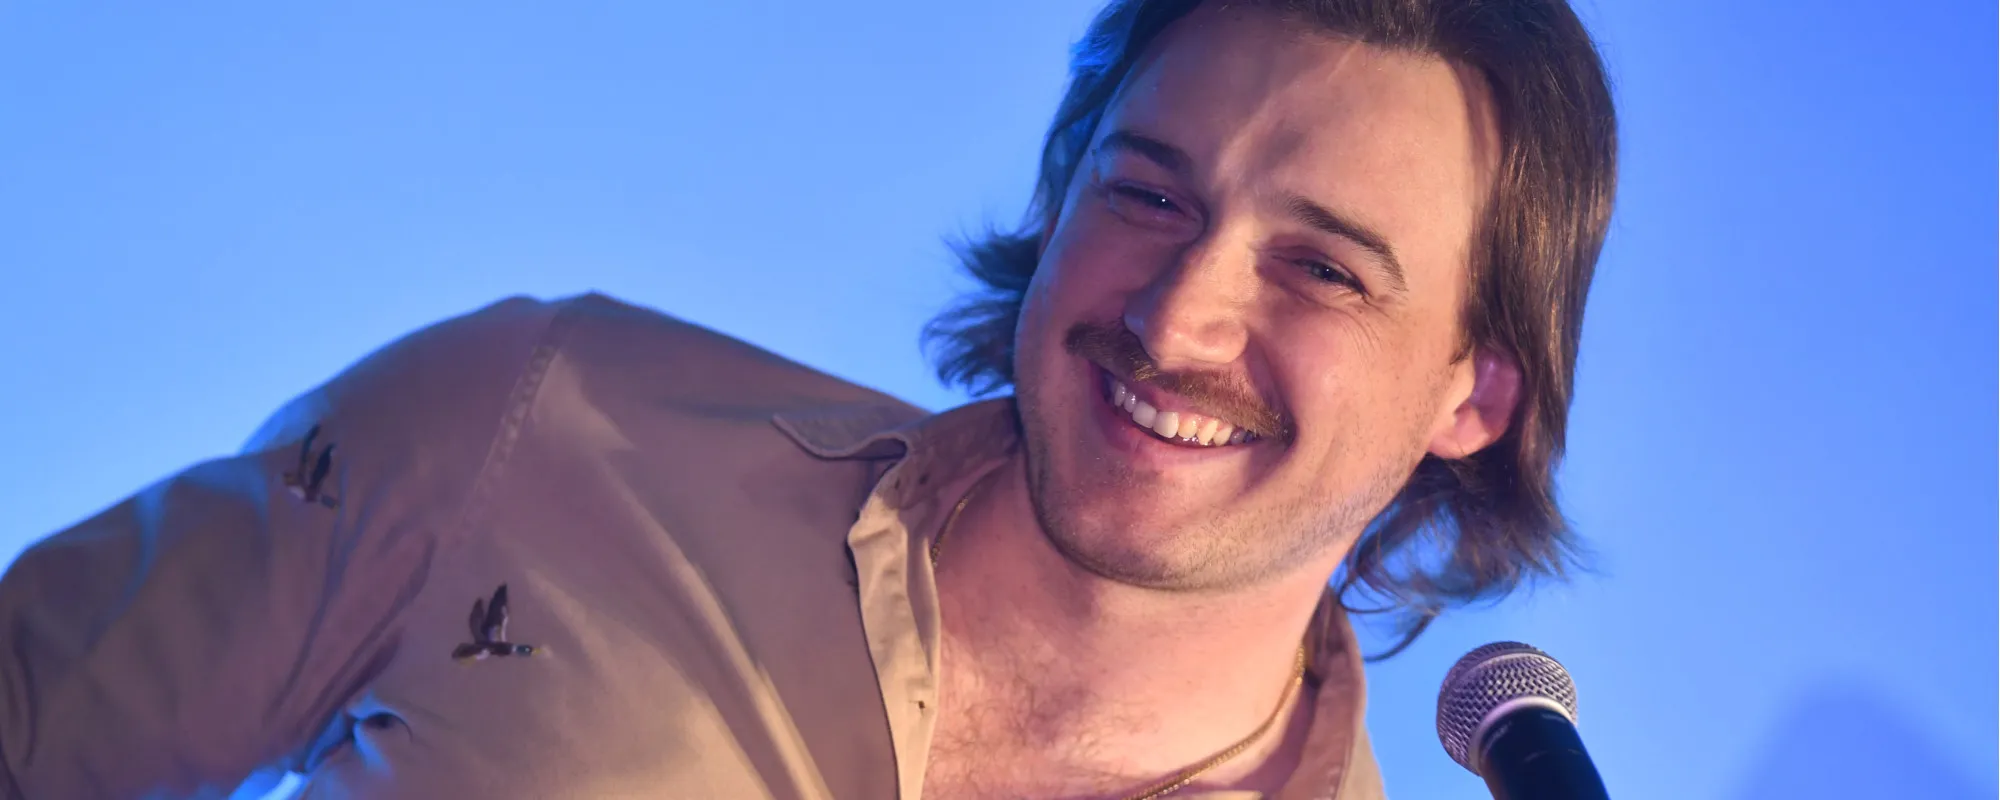 Watch Morgan Wallen’s Family Jam Out at His Concert, Sing Along to “The Way I Talk”